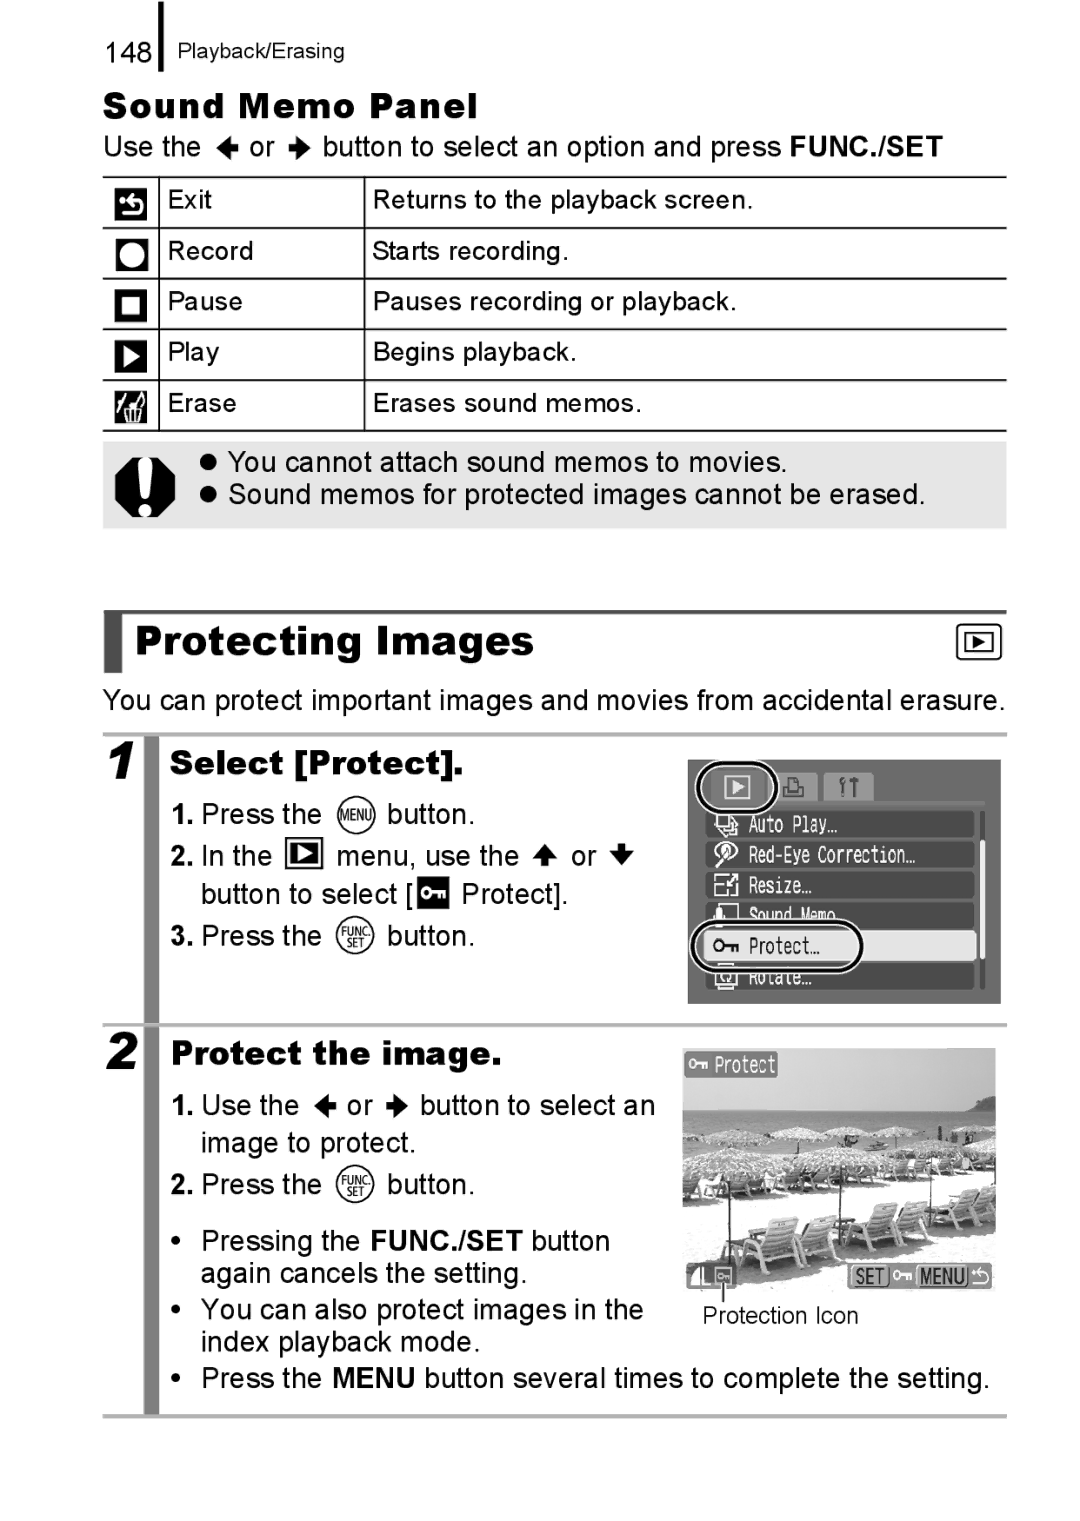 Canon A650 IS appendix Protecting Images, Sound Memo Panel, Select Protect, Protect the image 